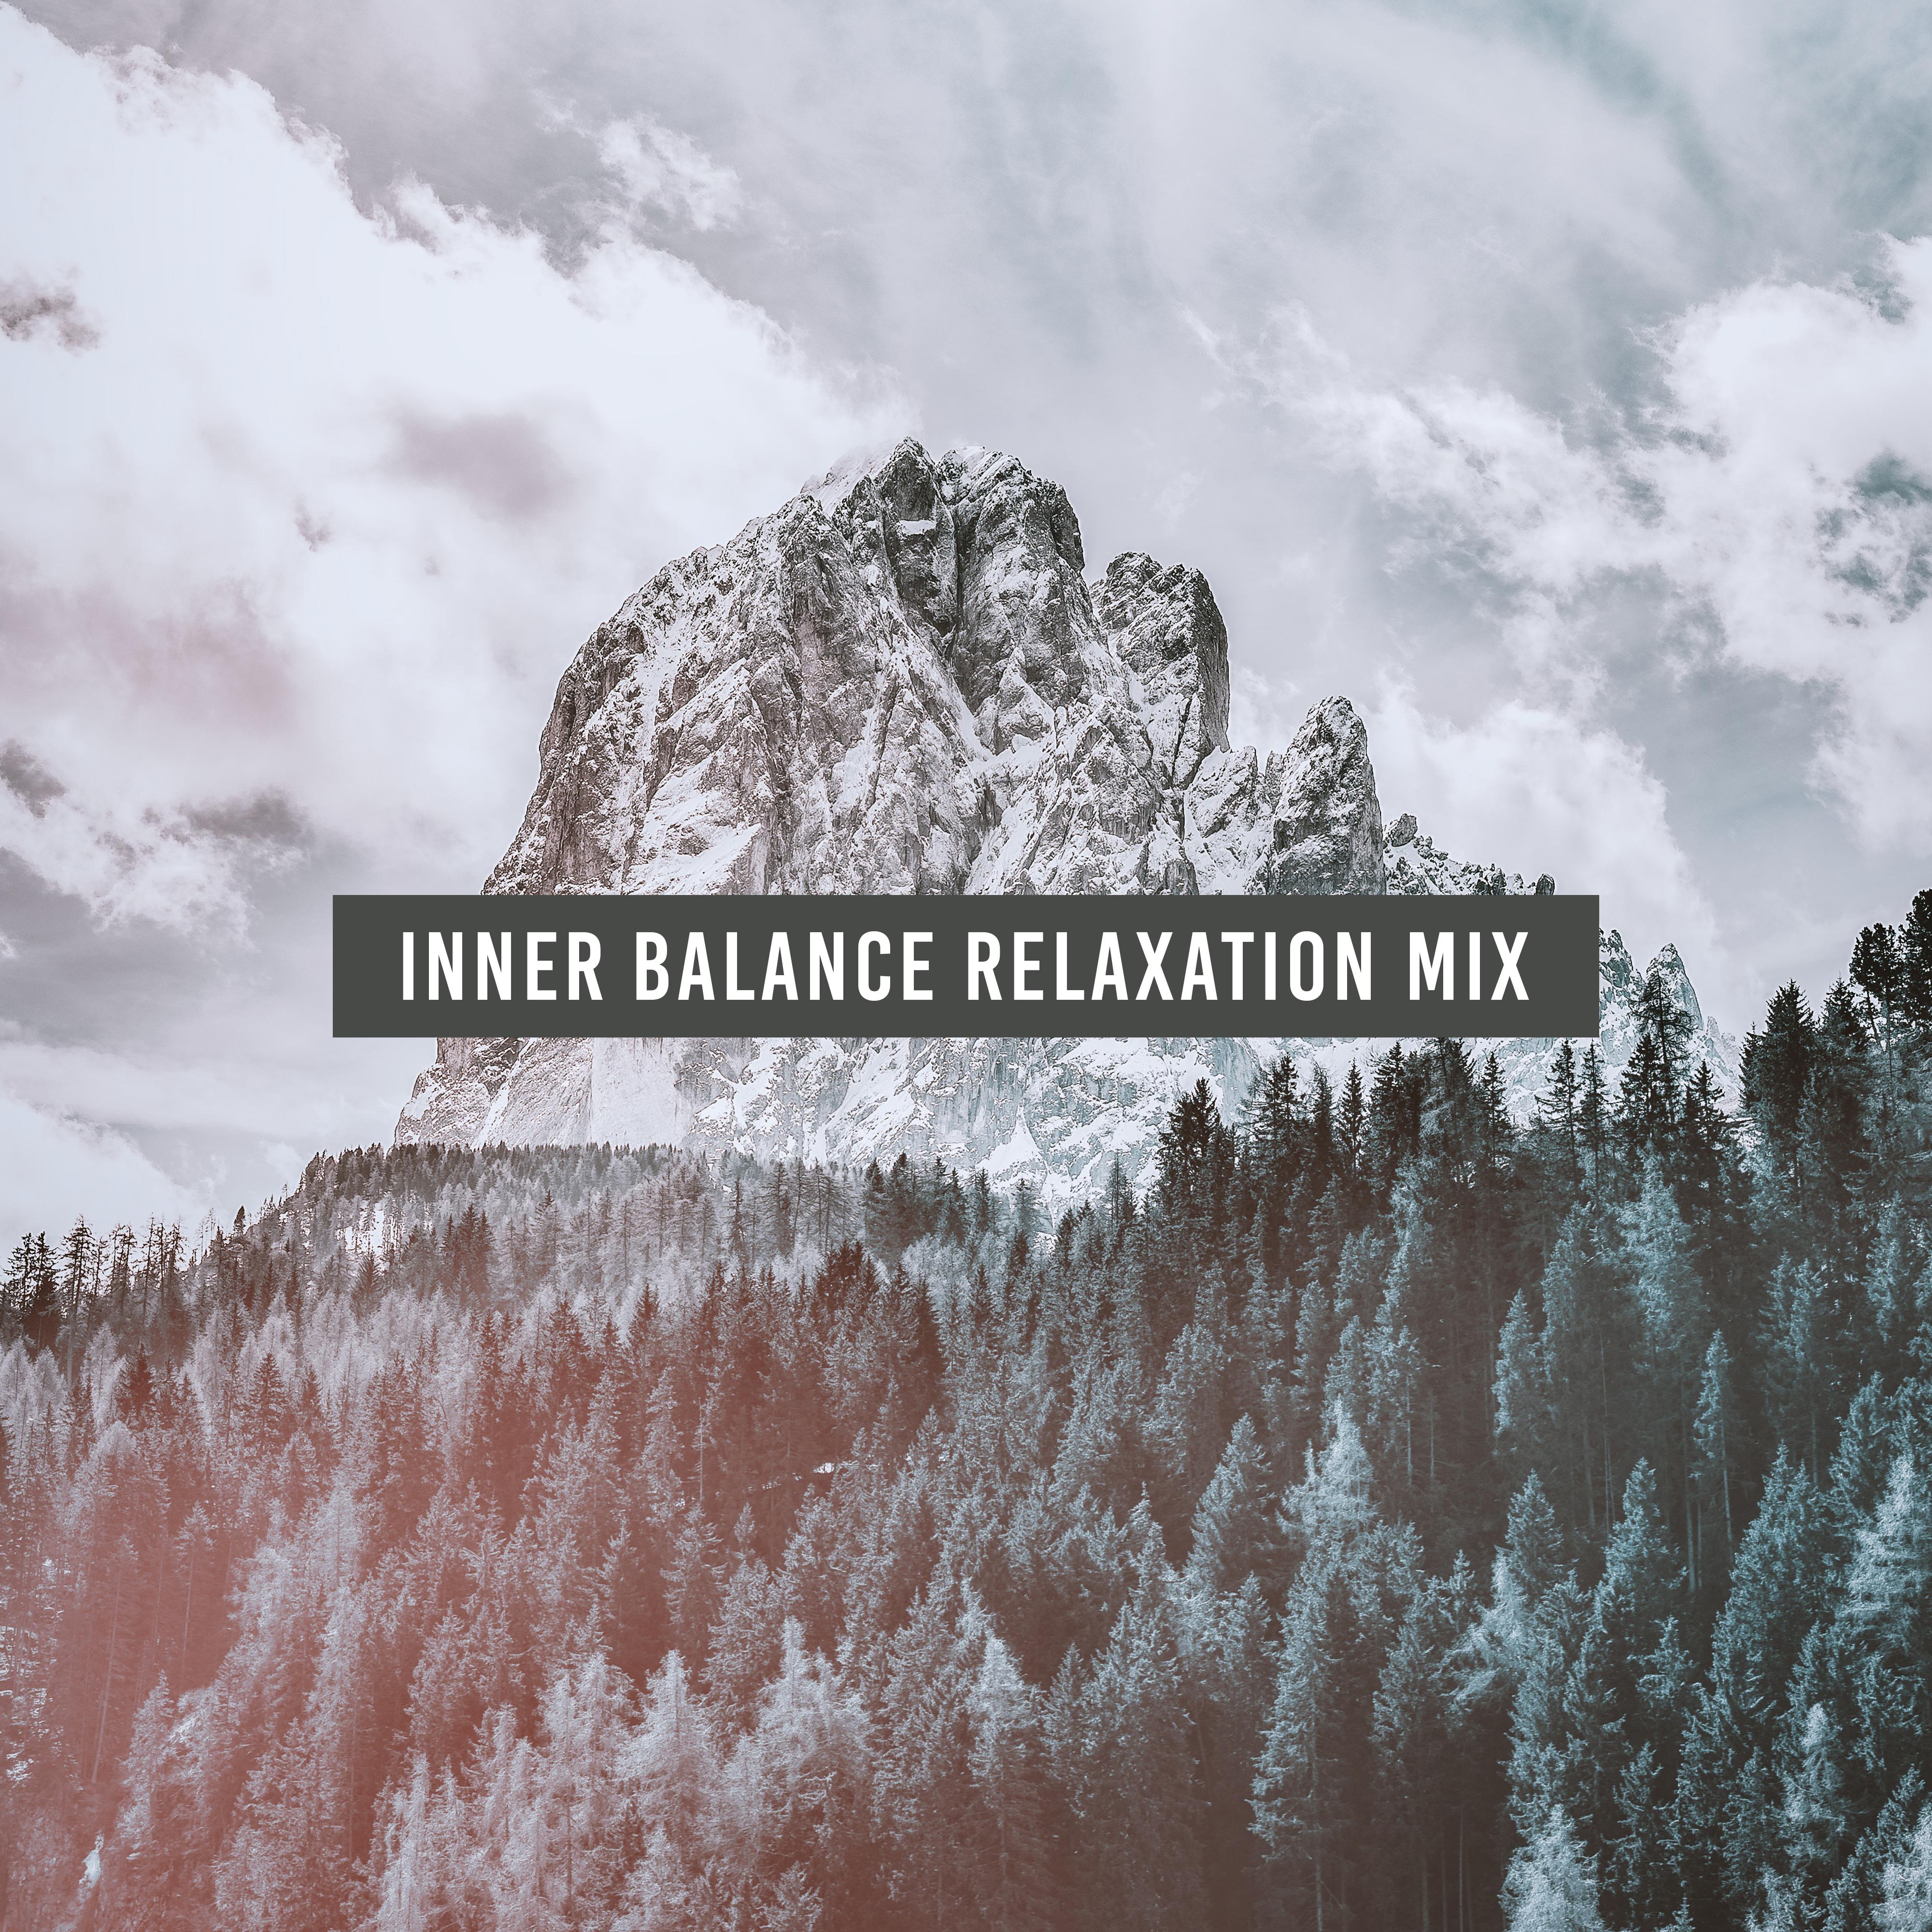 Inner Balance Relaxation Mix  New Age Music Compilation 2019, Full Calm Down  Stress Relief, Soothing Sounds Therapy, Pure Relax